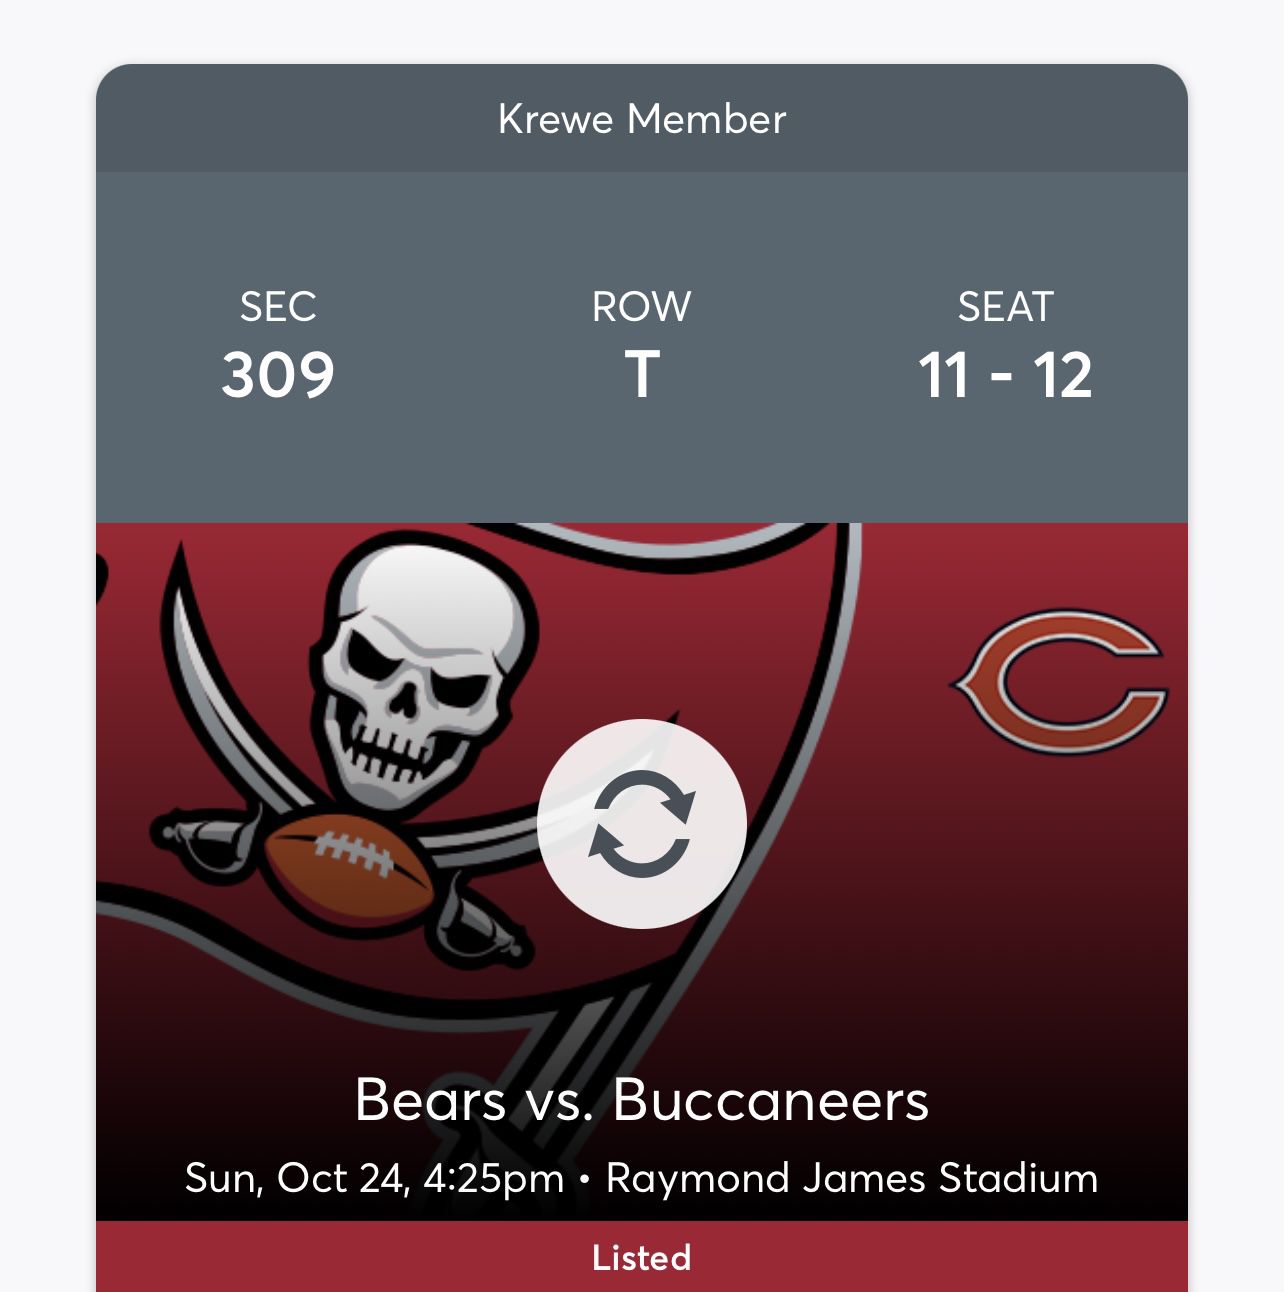 2 Tickets For The Buccaneers vs Bears 10/24 @ 4:25  $75  Ea  OBO NO FEES